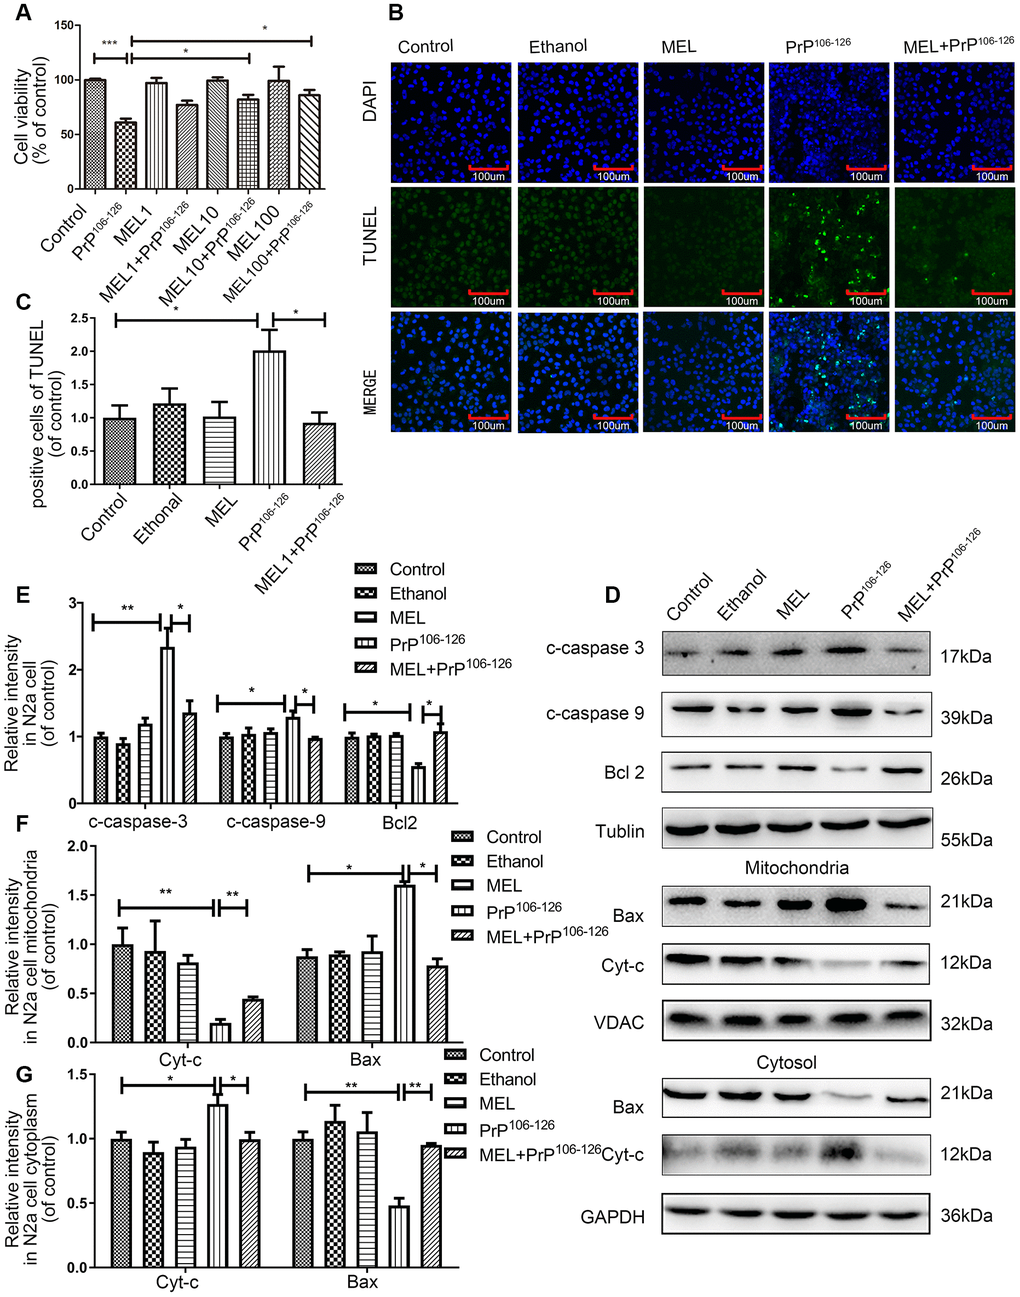 Melatonin attenuated PrP106-126-induced N2a cell apoptosis. (A) N2a cell viability was assayed using the CCK8 kit after treatment with melatonin and PrP106-126. (B, C) N2a cell apoptosis was assayed by TUNEL staining. (D–G) Protein expression of cleaved caspase-9, cleaved caspase-3 and Bcl2 in N2a cells, and protein expression of cytochrome c and Bax in cytosolic and mitochondrial extracts of N2a cells by western blotting. *P 